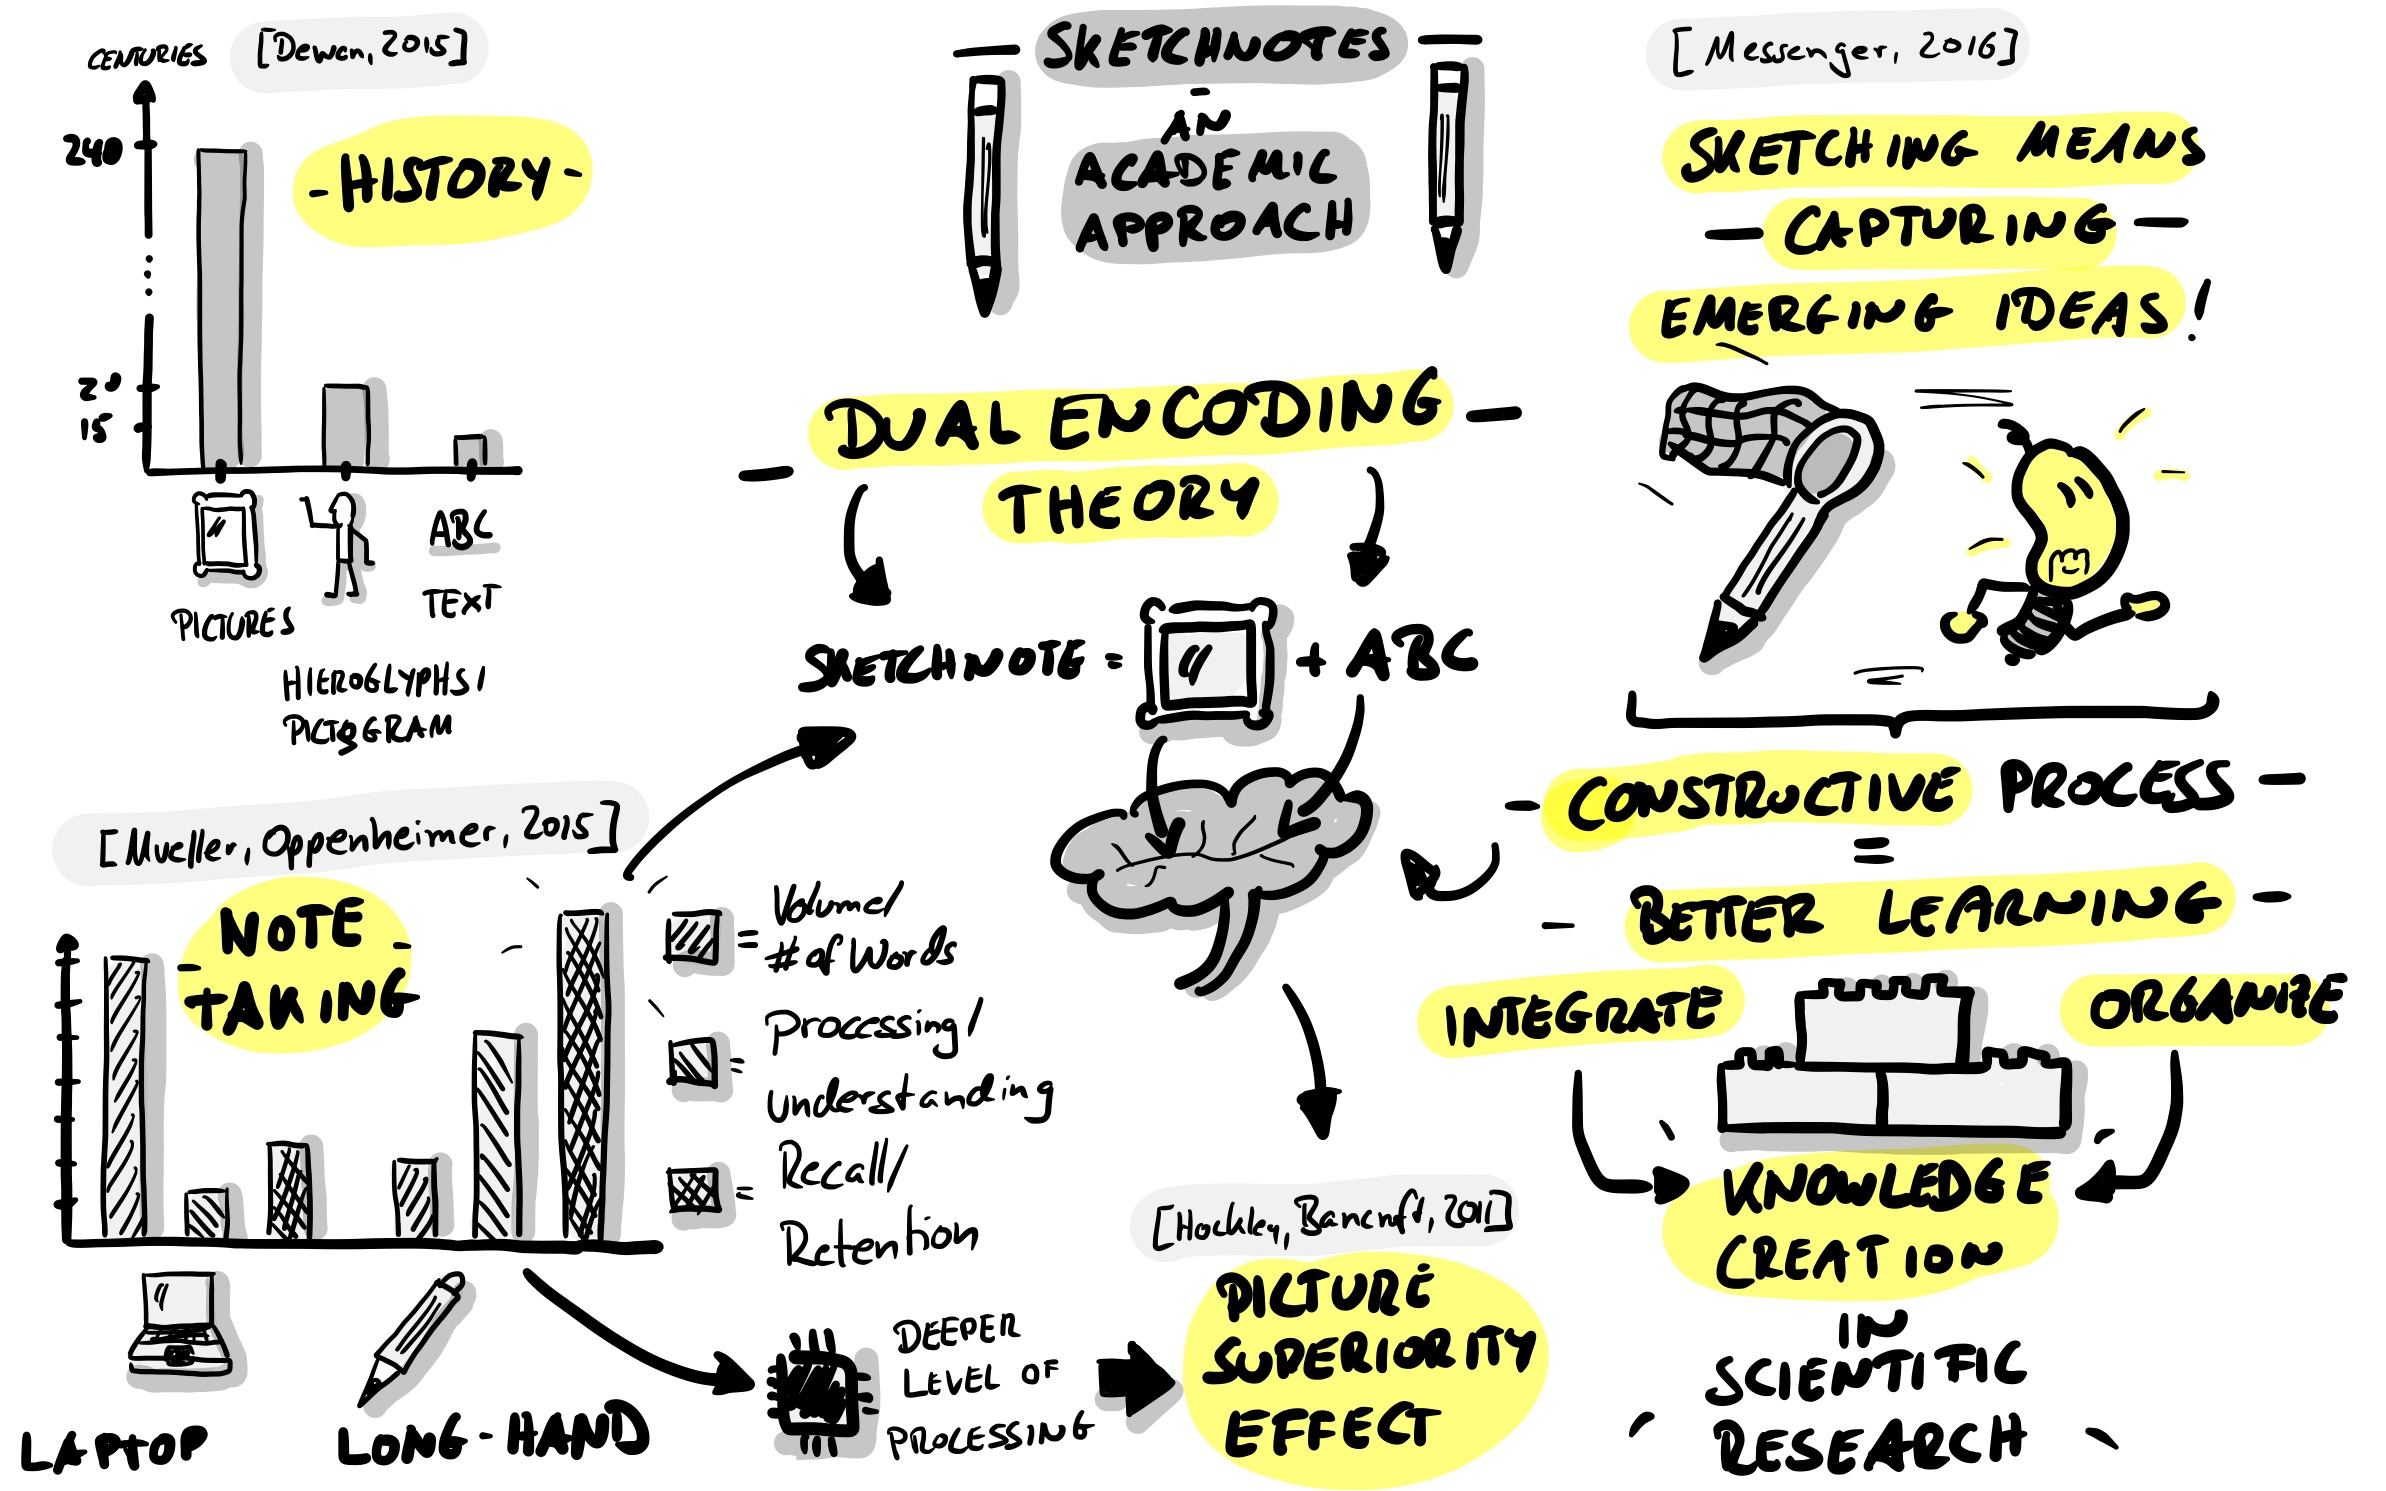 Sketchnotes - An Academic Approach by @BartschatLars, CC BY 4.0